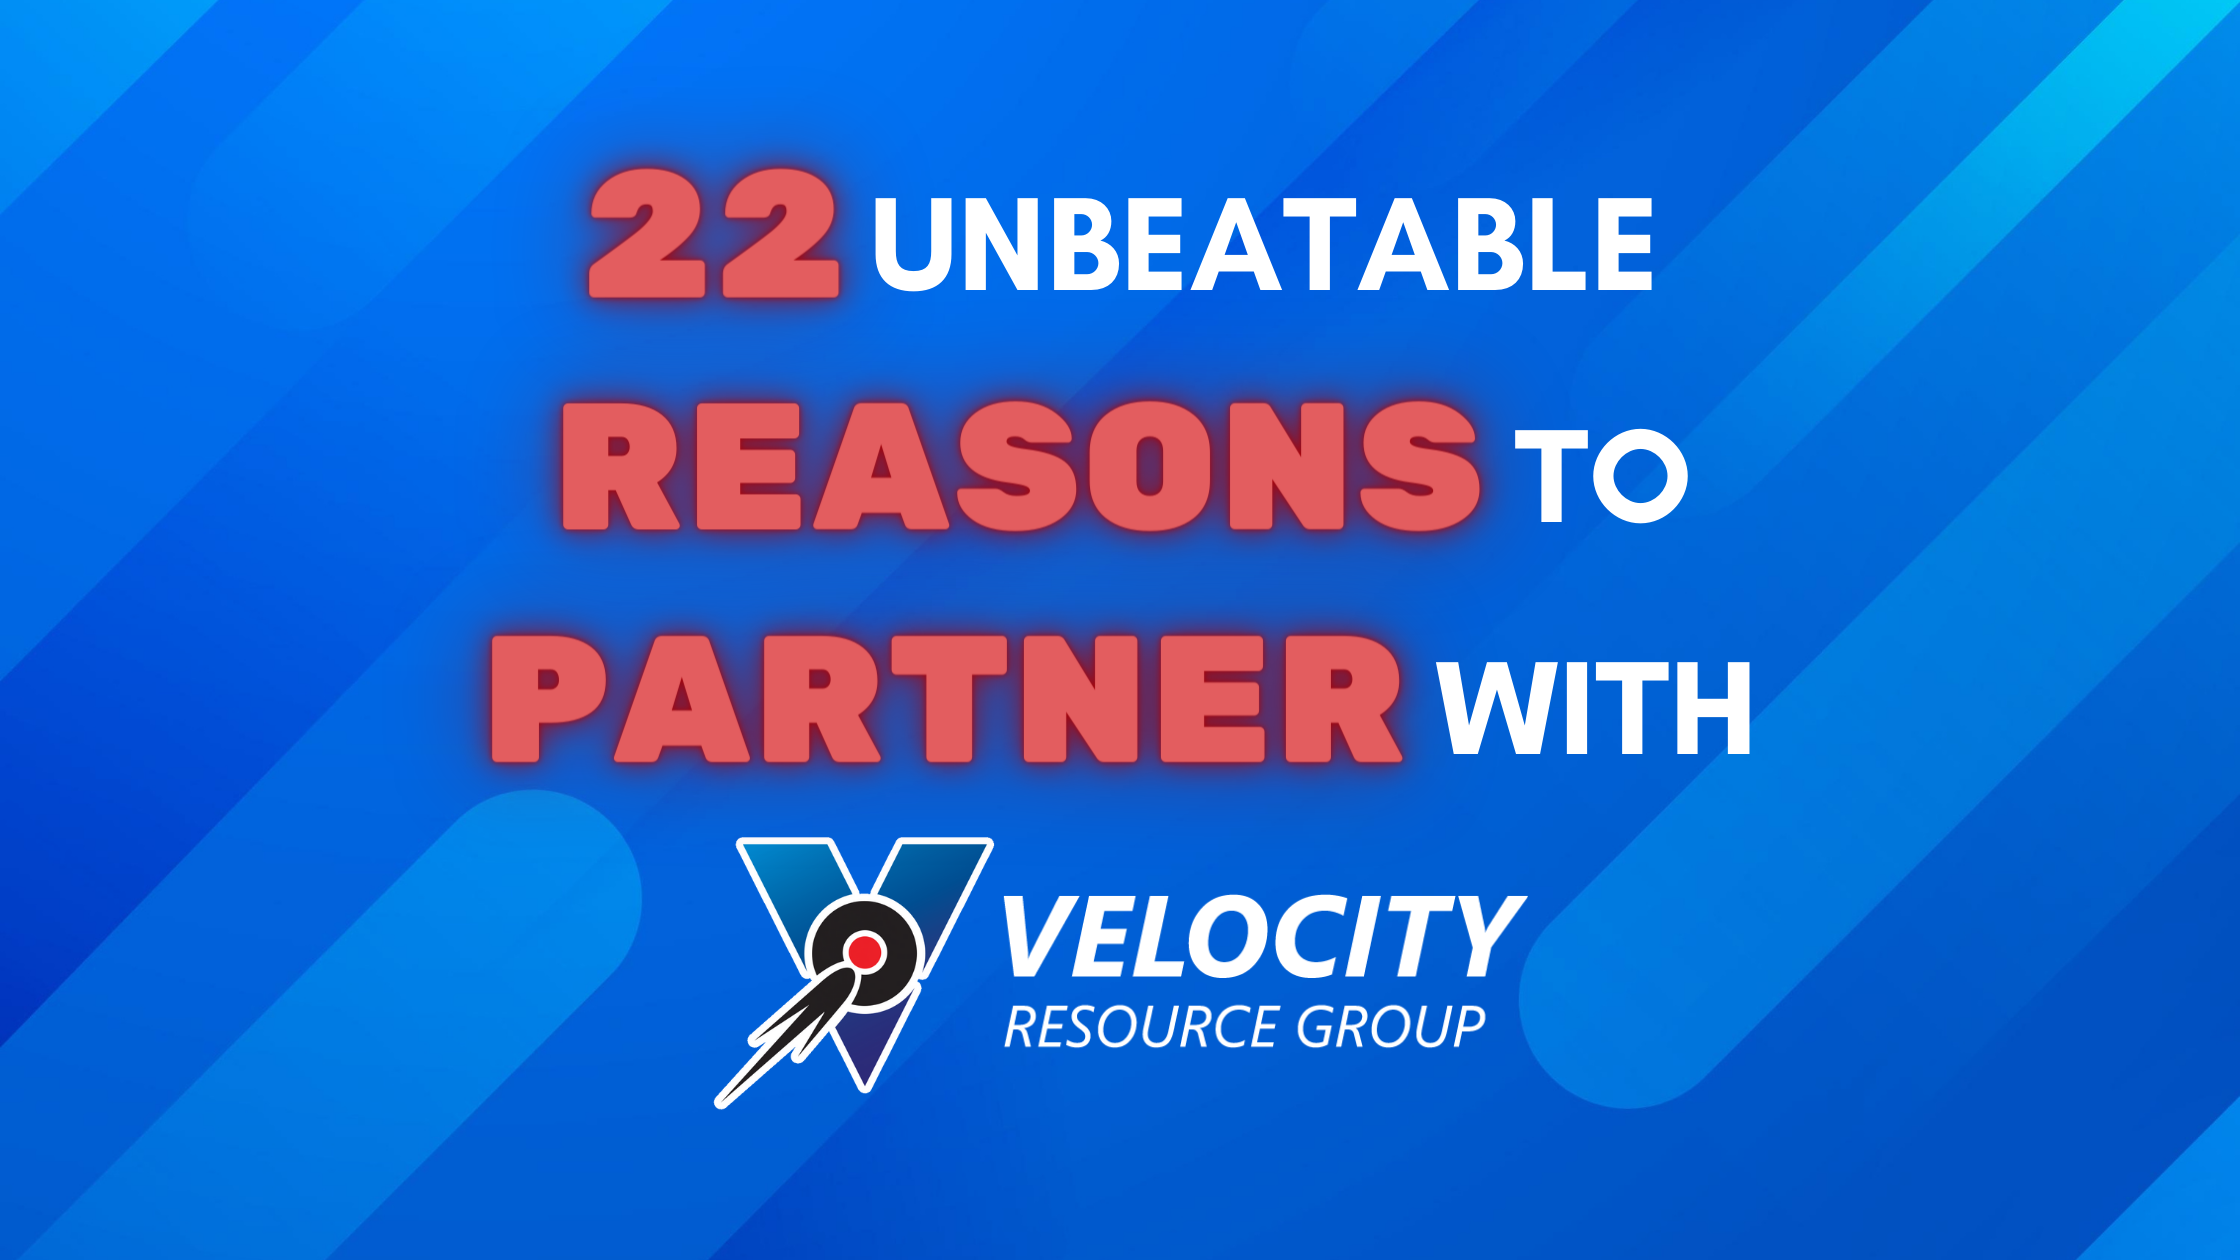 Why Partner with Velocity - 22 Reasons